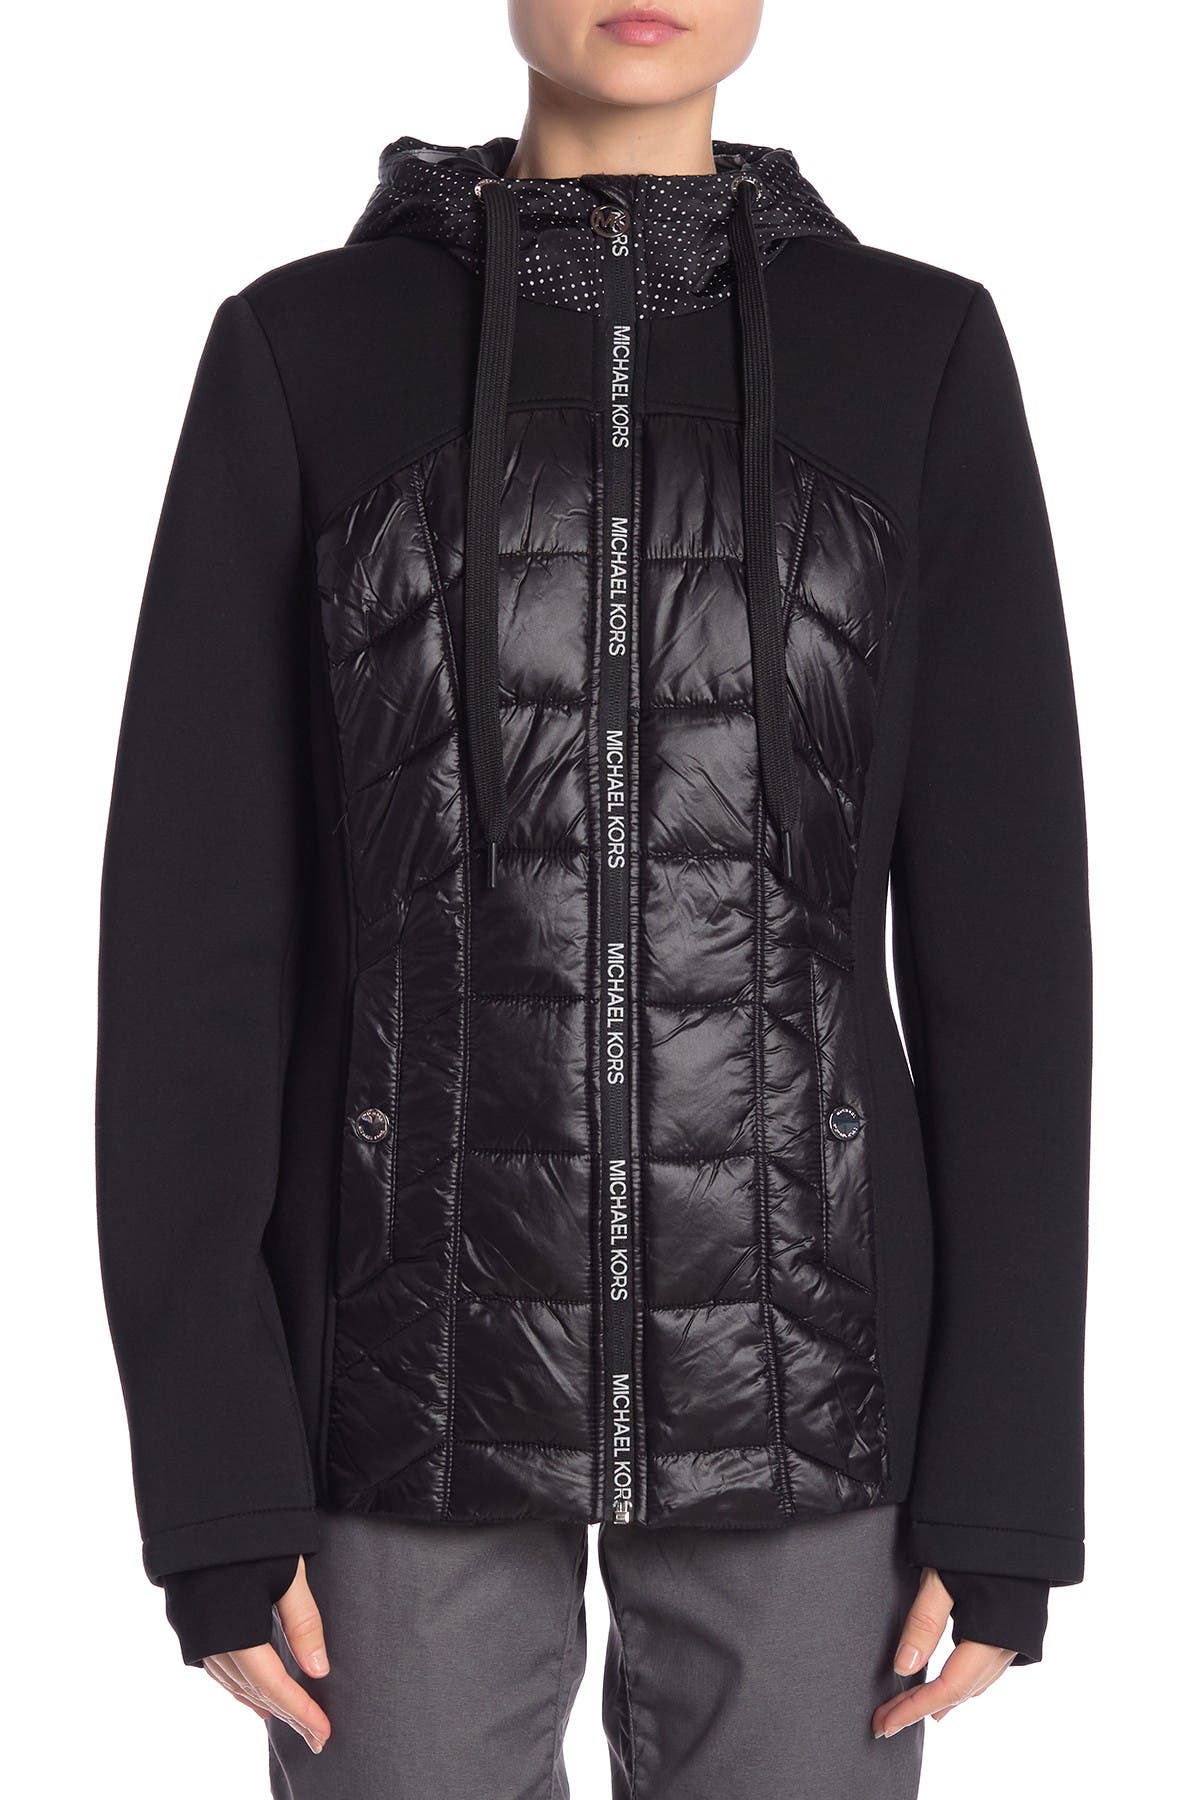 michael kors mixed media quilted jacket